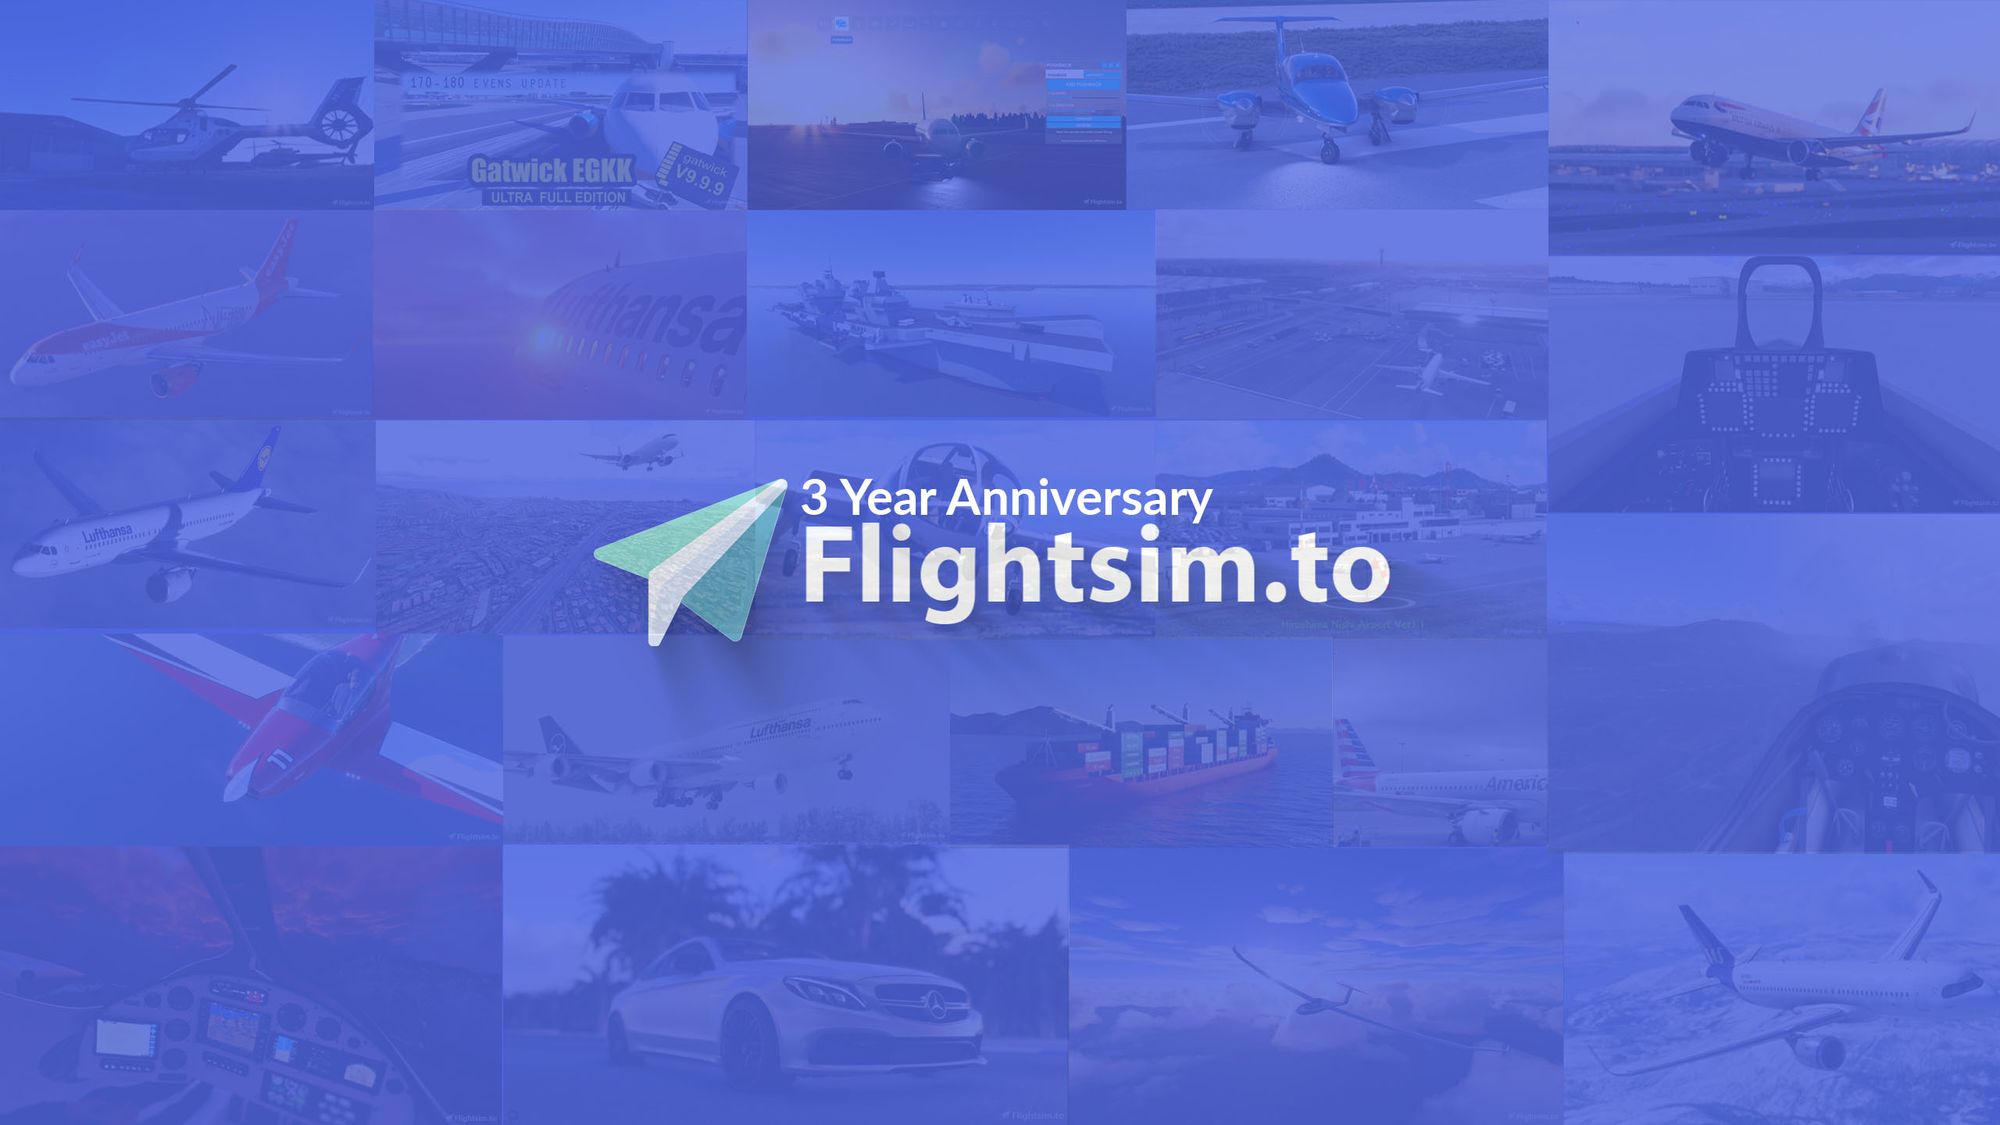 Introducing Collections on Flightsim.to